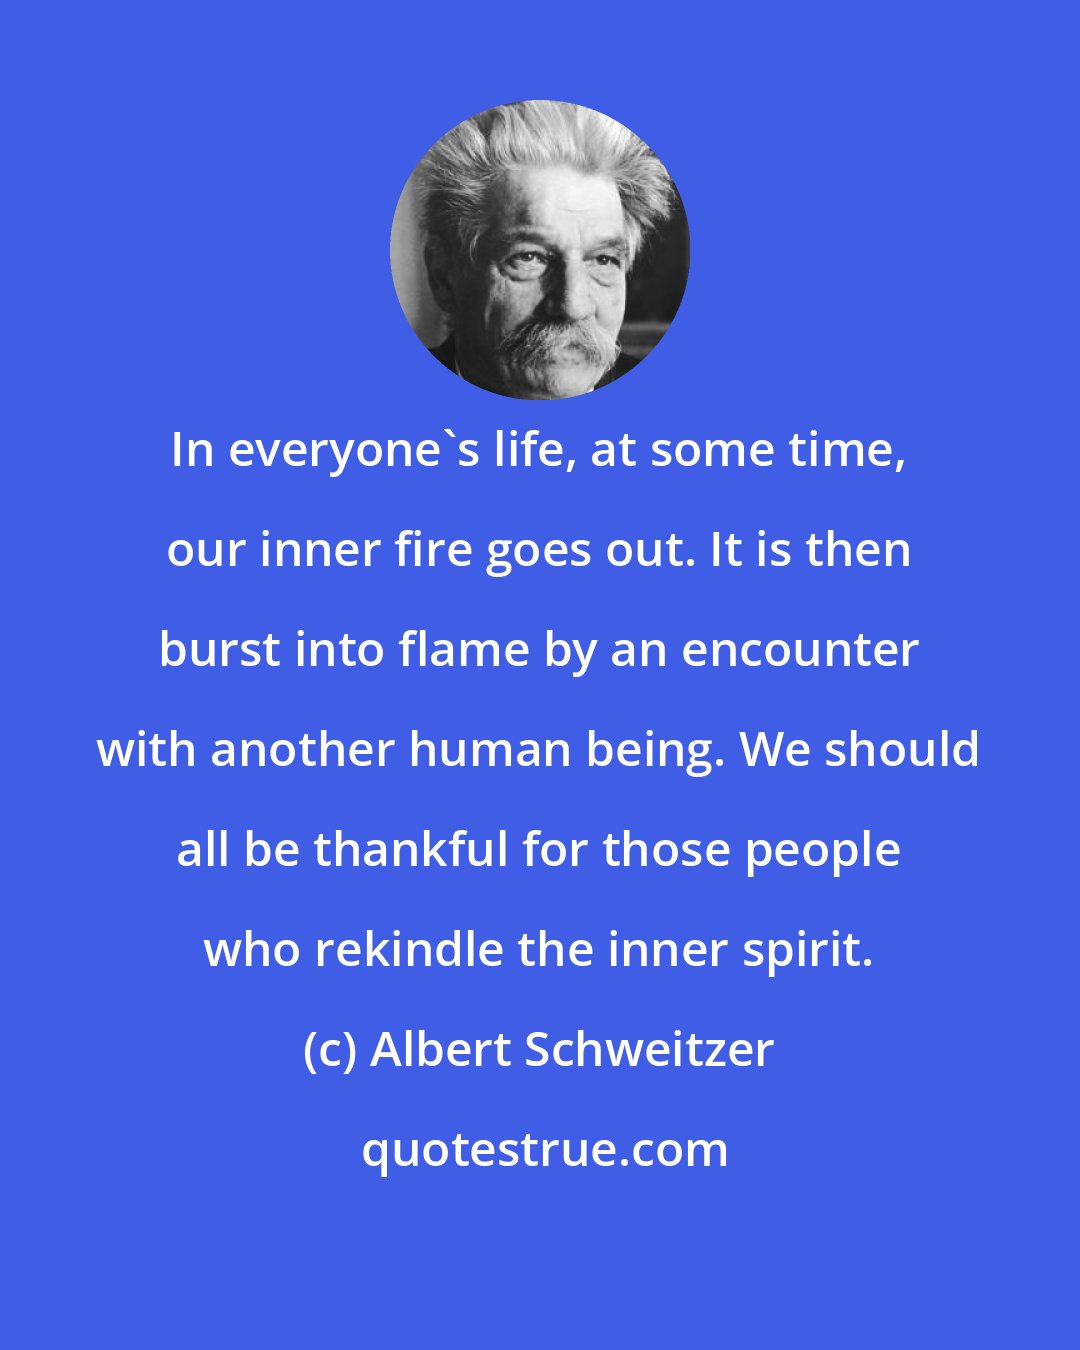 Albert Schweitzer: In everyone's life, at some time, our inner fire goes out. It is then burst into flame by an encounter with another human being. We should all be thankful for those people who rekindle the inner spirit.